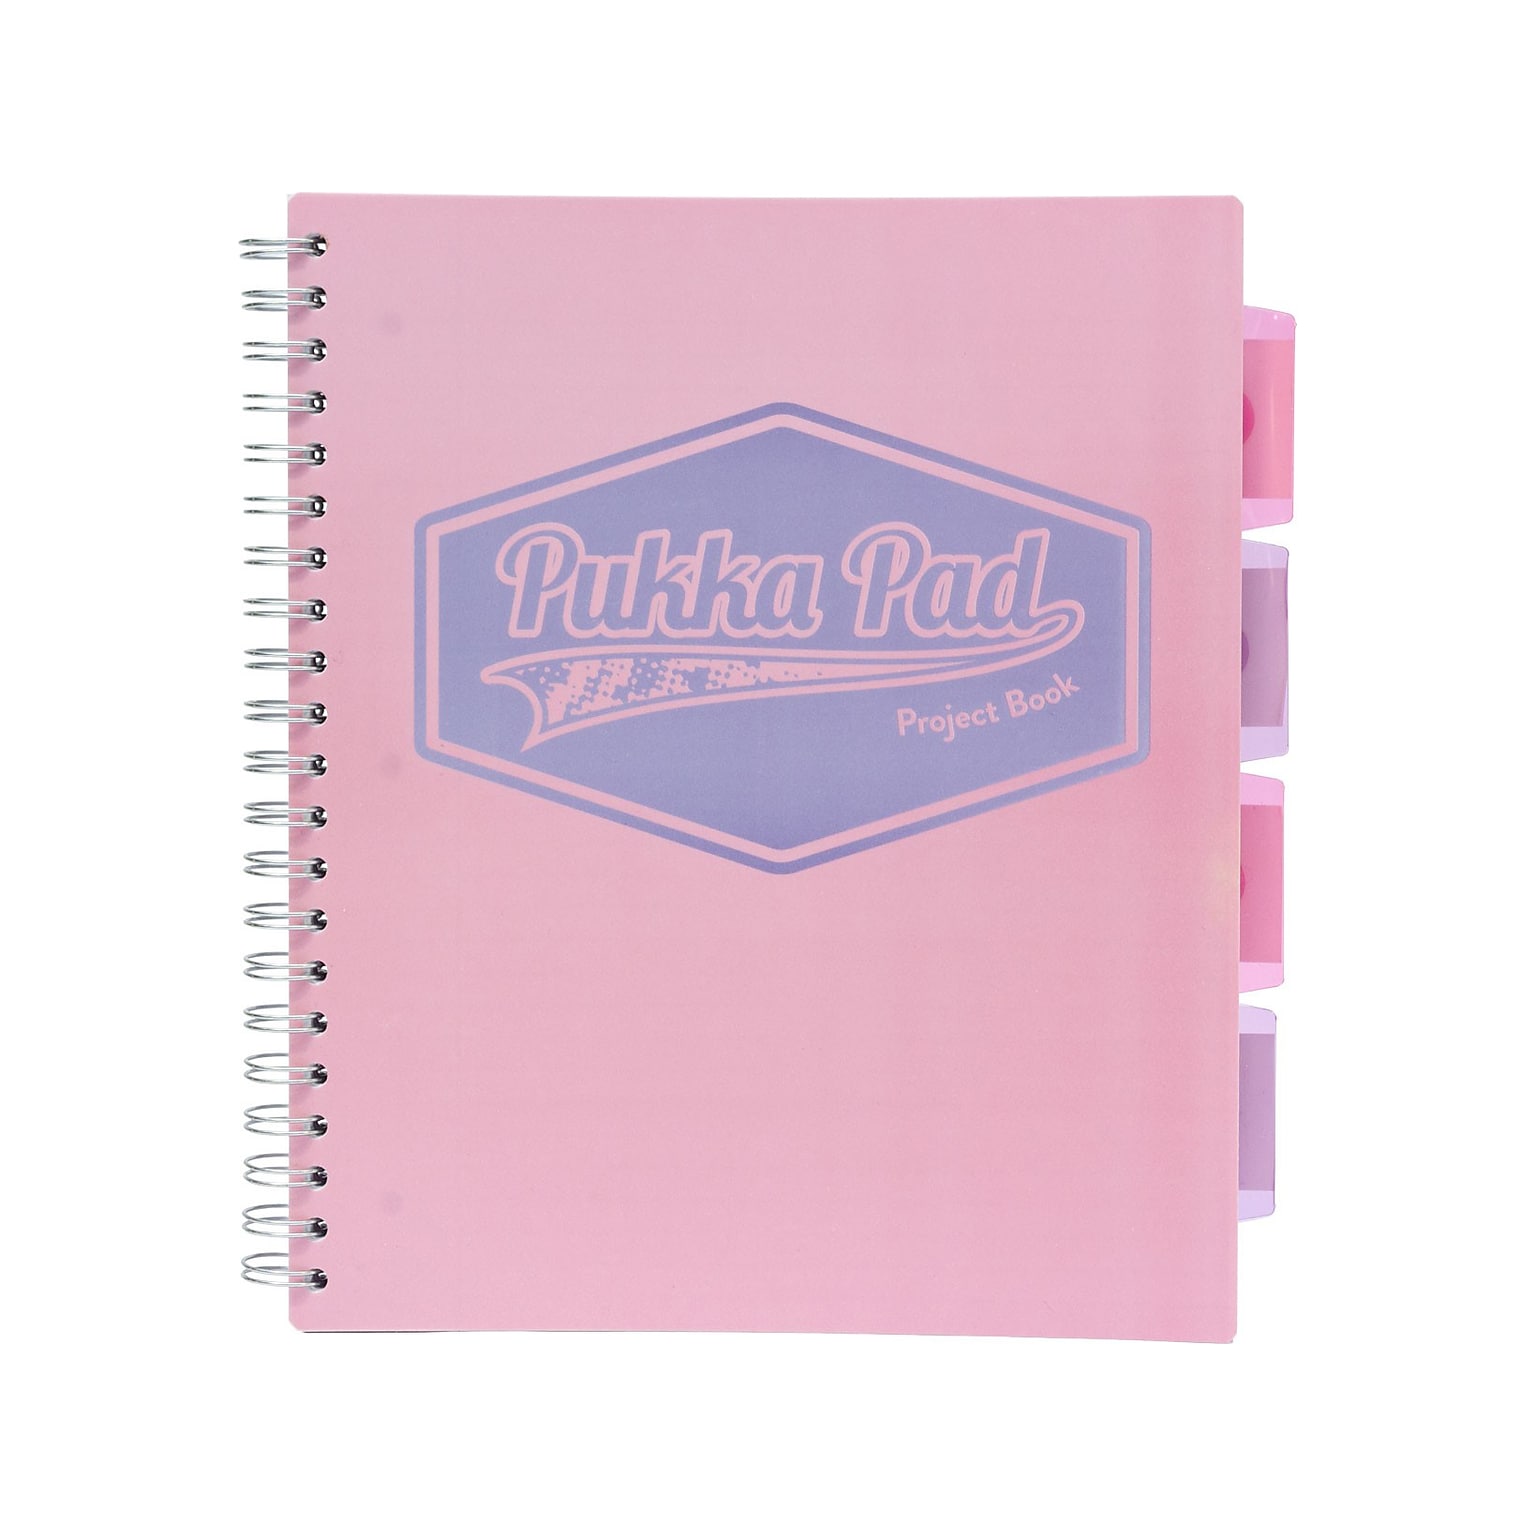 Pukka Pad Pastels 5-Subject Notebooks, 8.5 x 11, Ruled, 100 Sheets, Assorted Colors, 3/Pack (8867-PST)